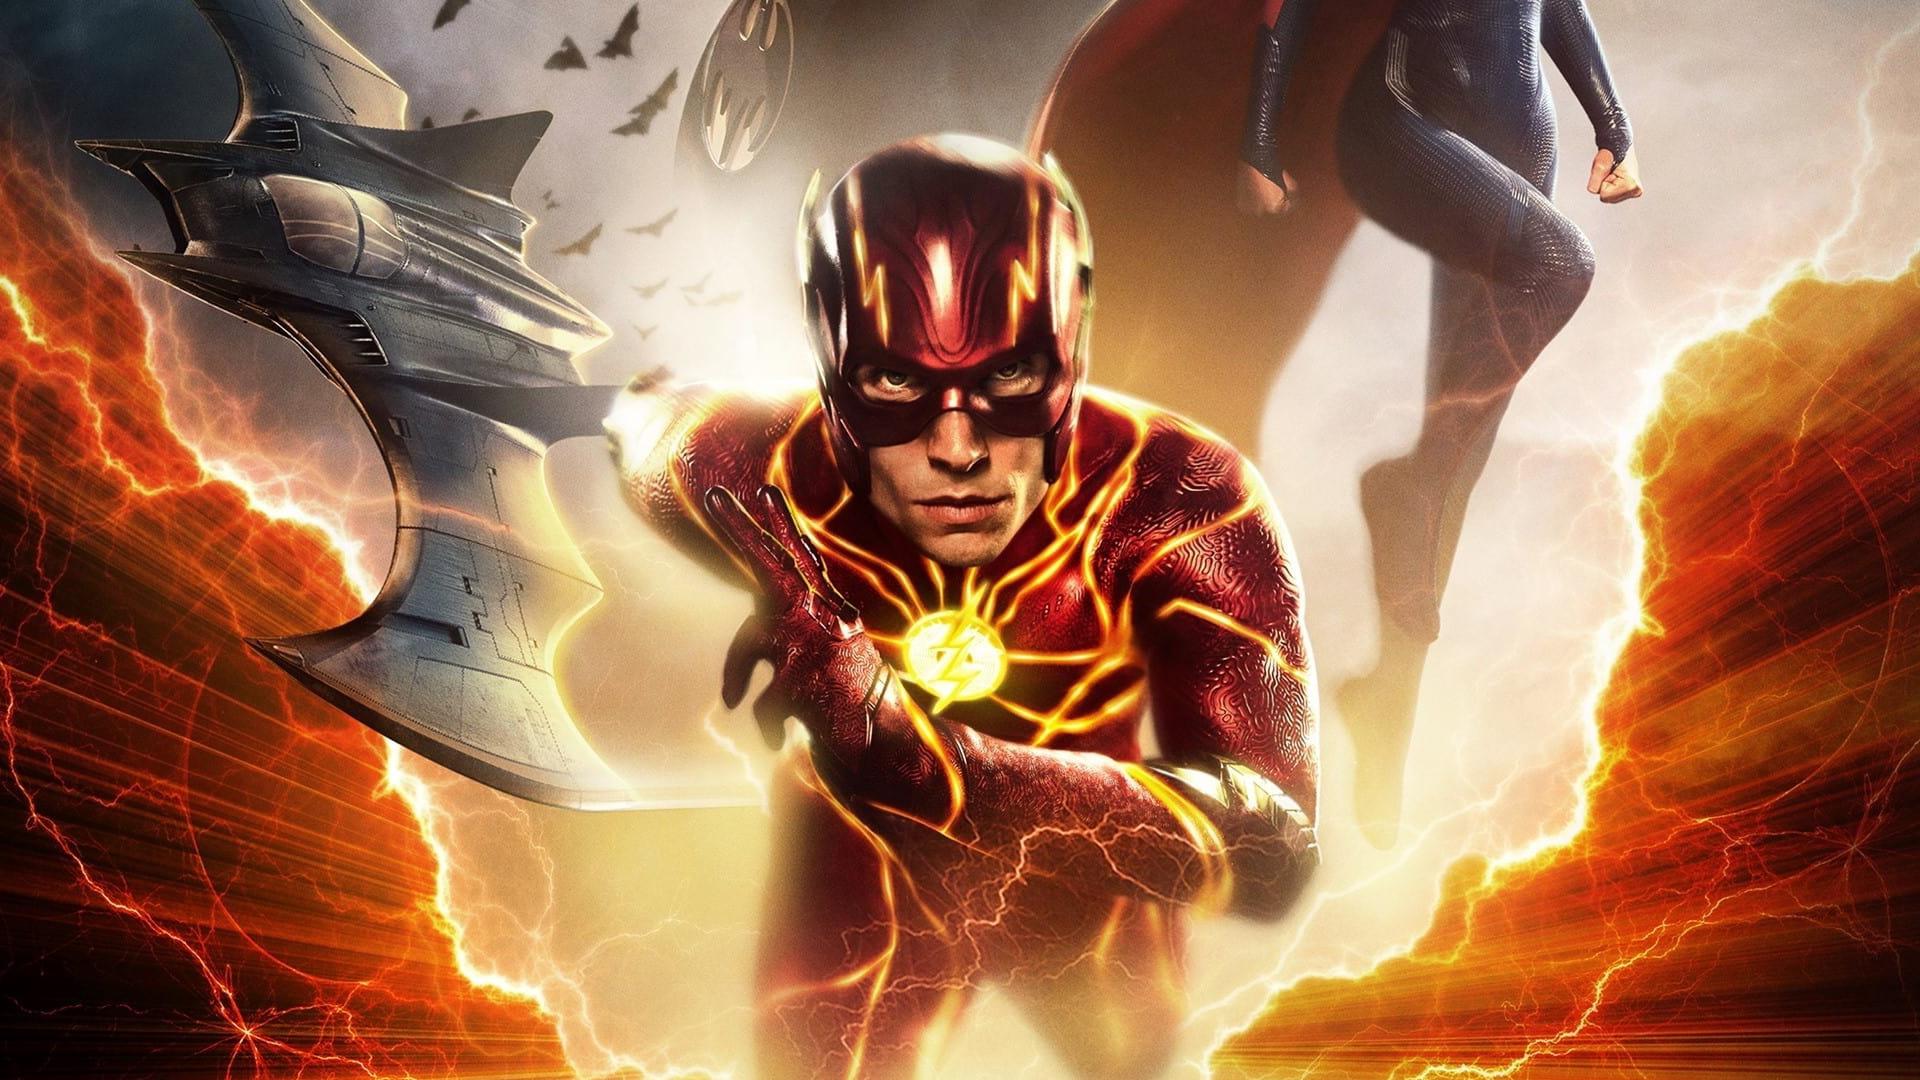 The Flash: Is It One of The Best DC Movies?